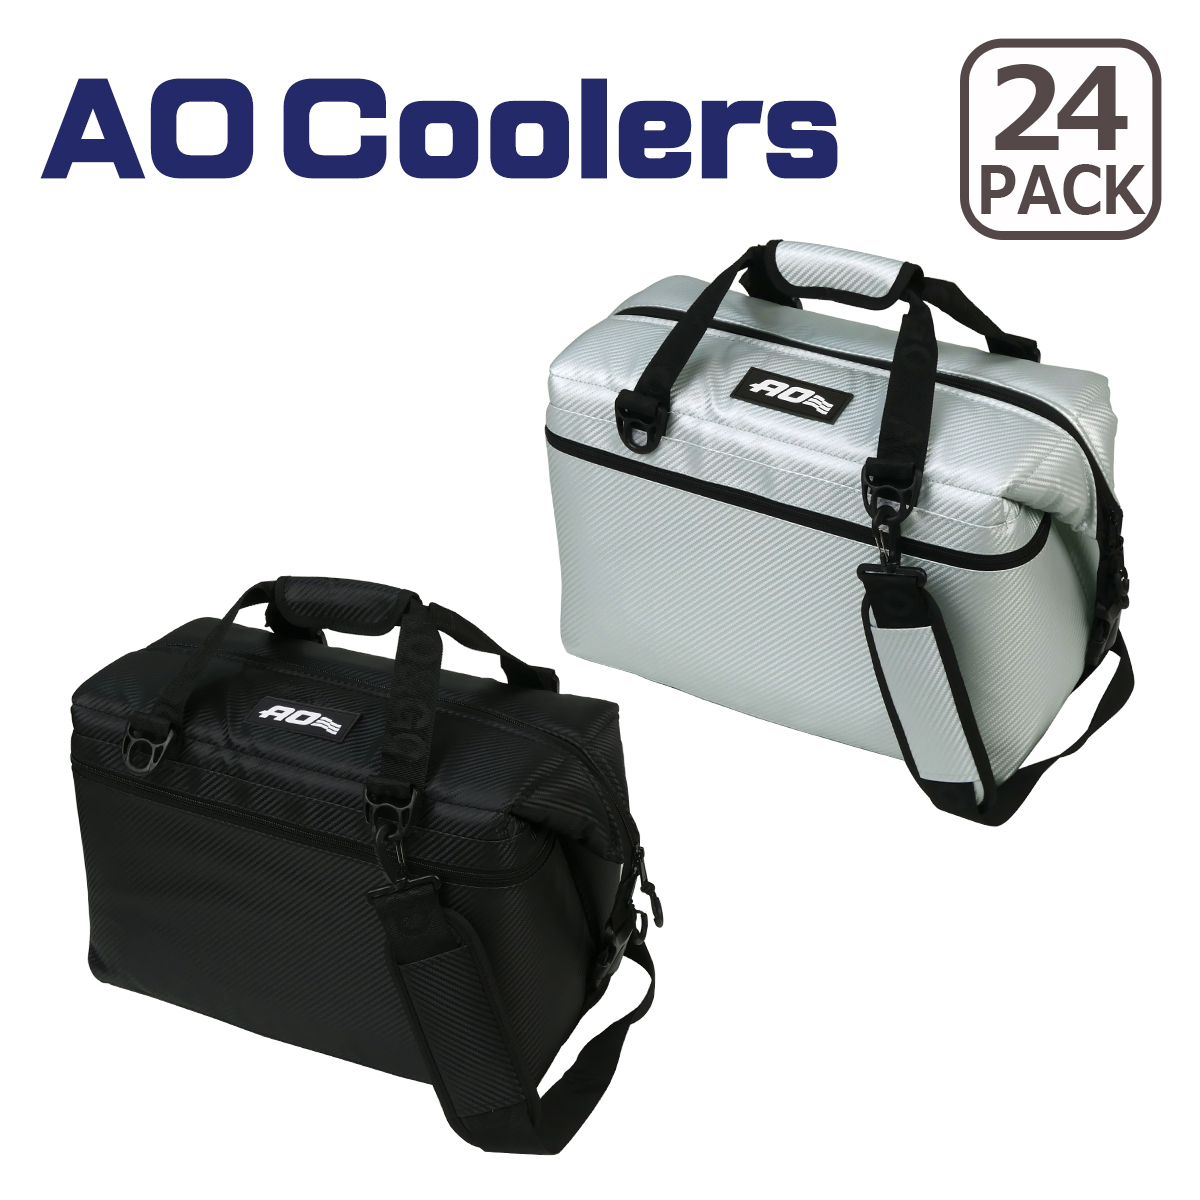 AOクーラーズ クーラーボックス AO Coolers 24 PACK CARBON カーボン 